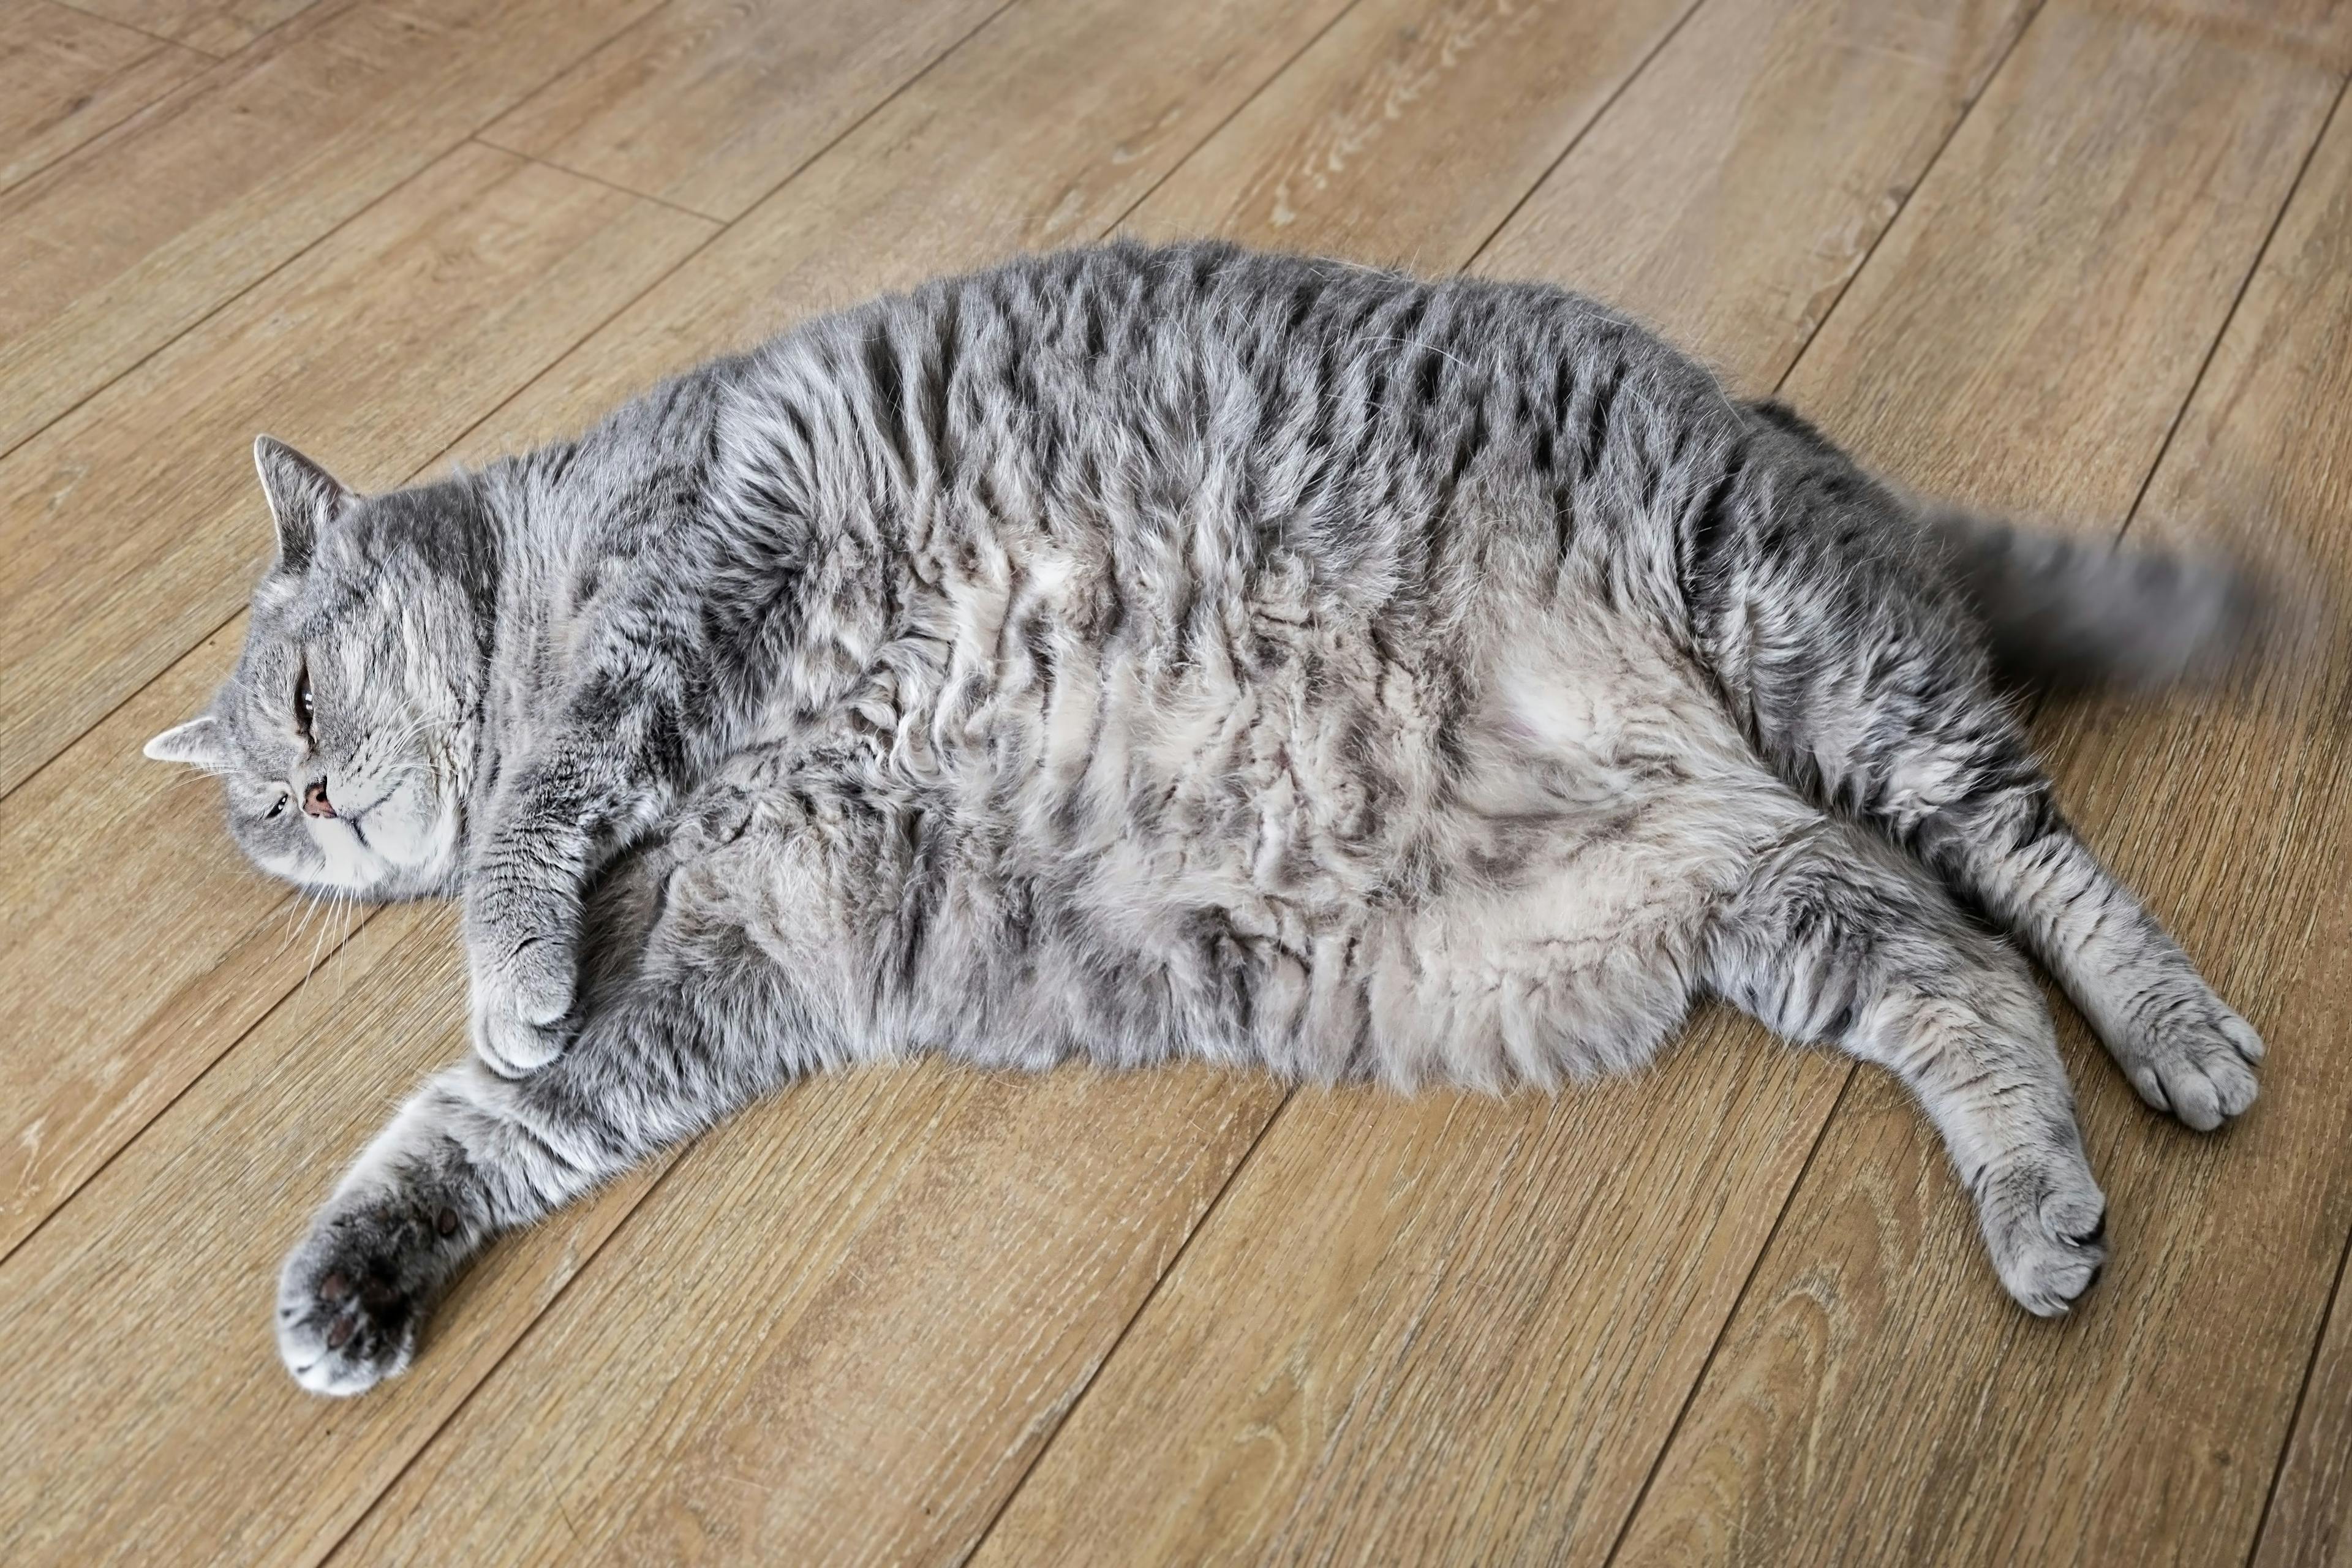 Human drug implant shows positive outcomes for feline obesity and diabetes management